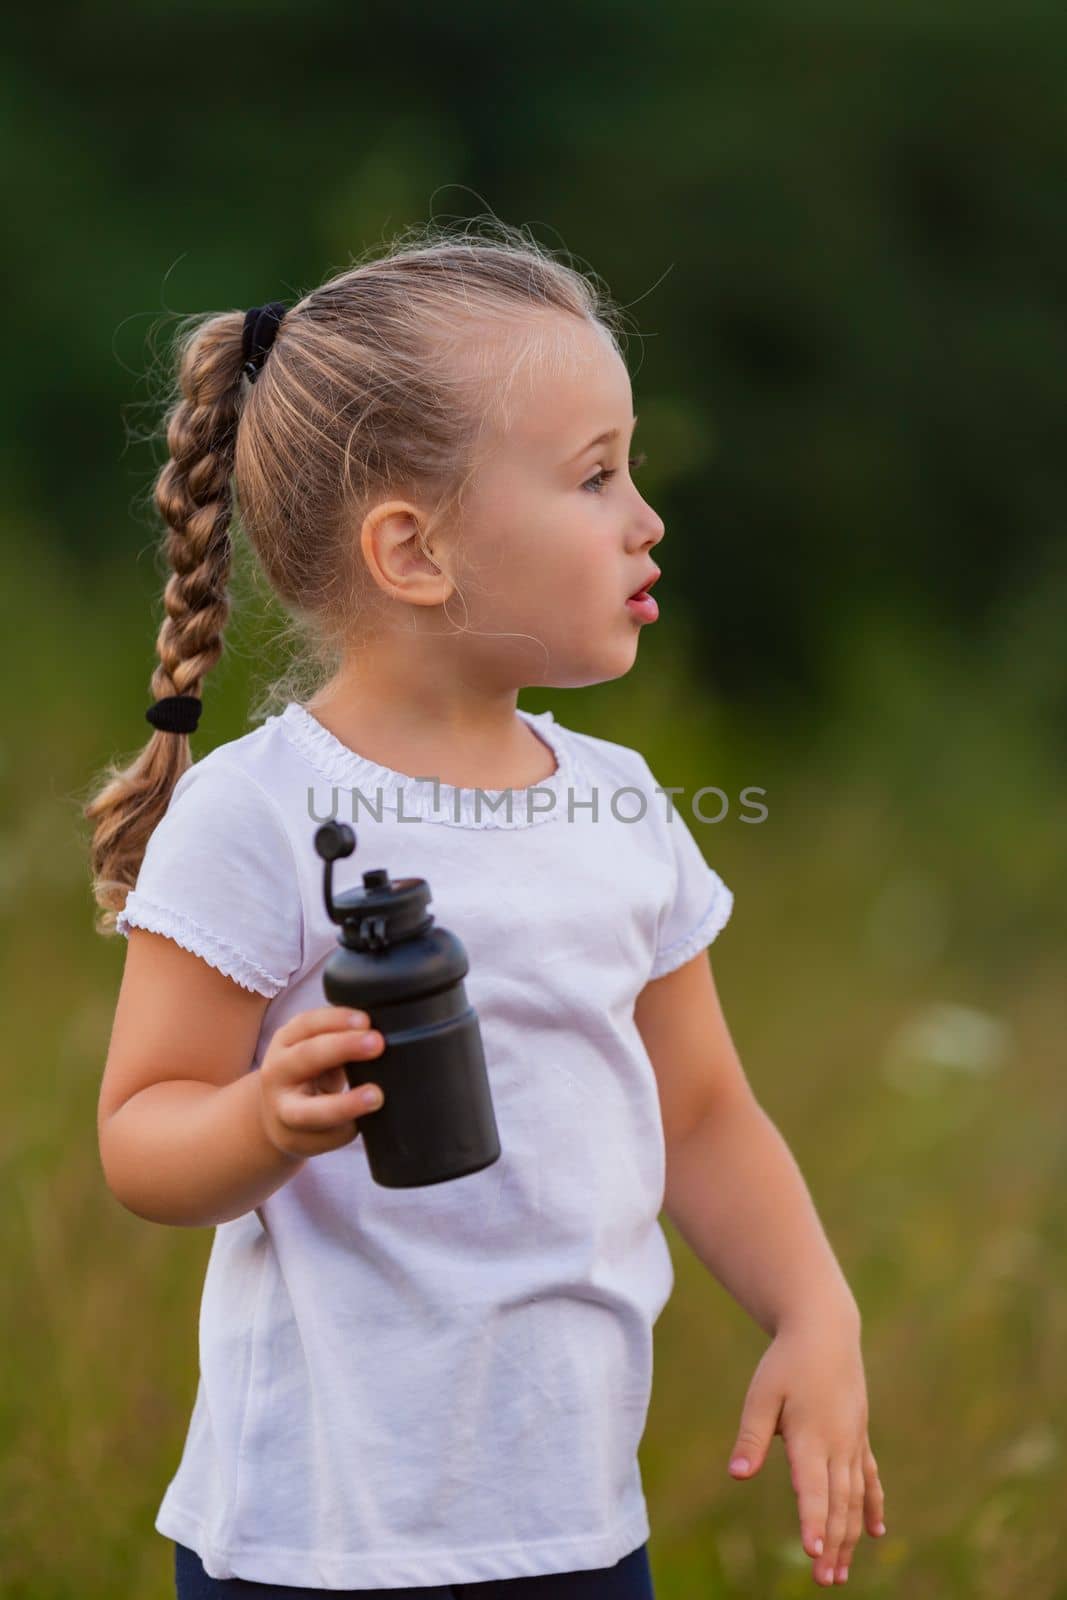 child drinking water from a bottle while outdoors